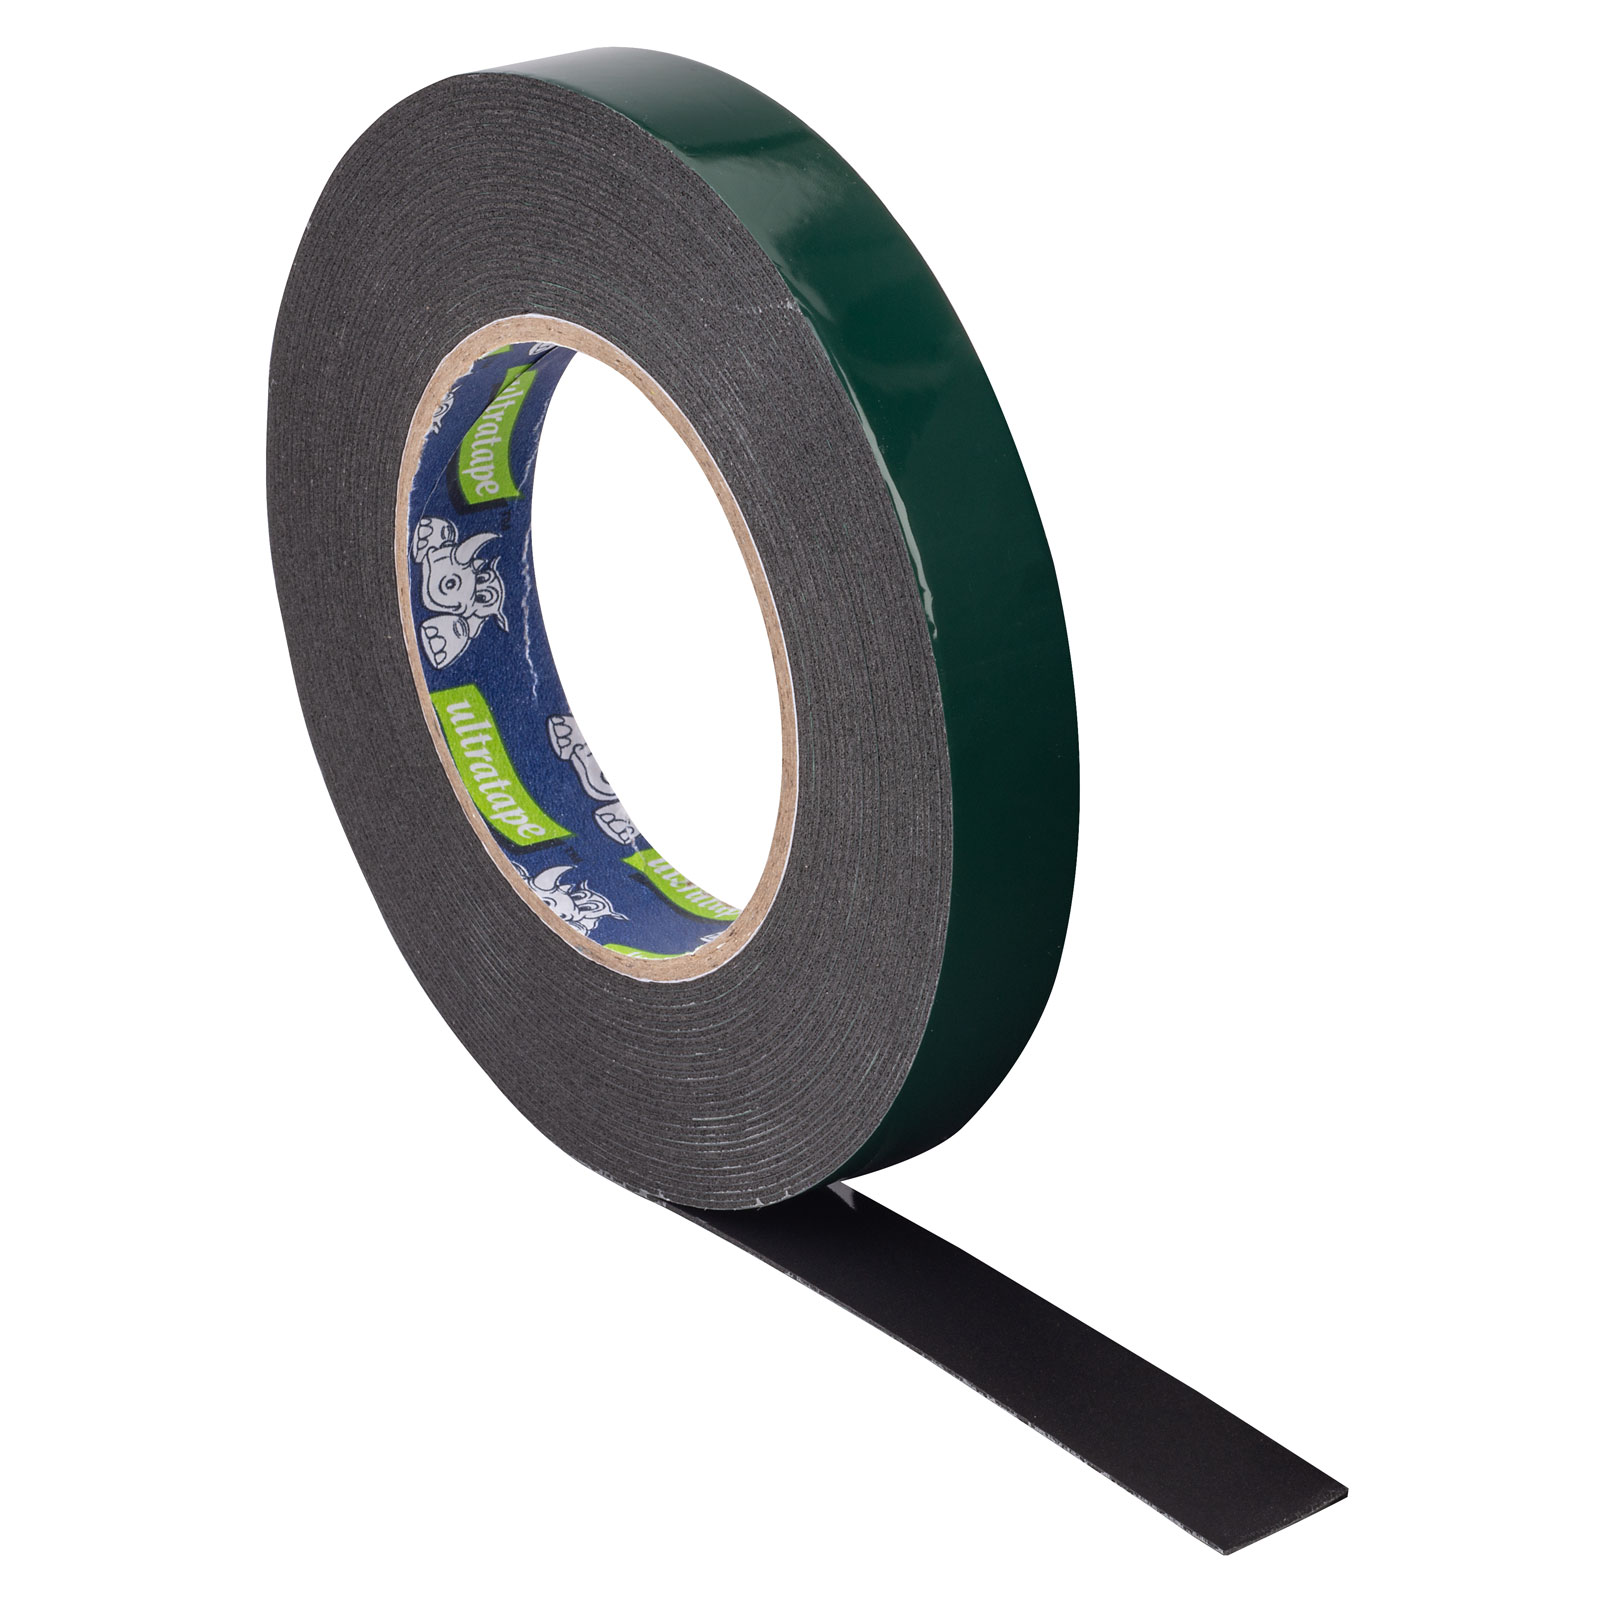 Recollections 1/4 Double-Sided Foam Tape - Each 10658329